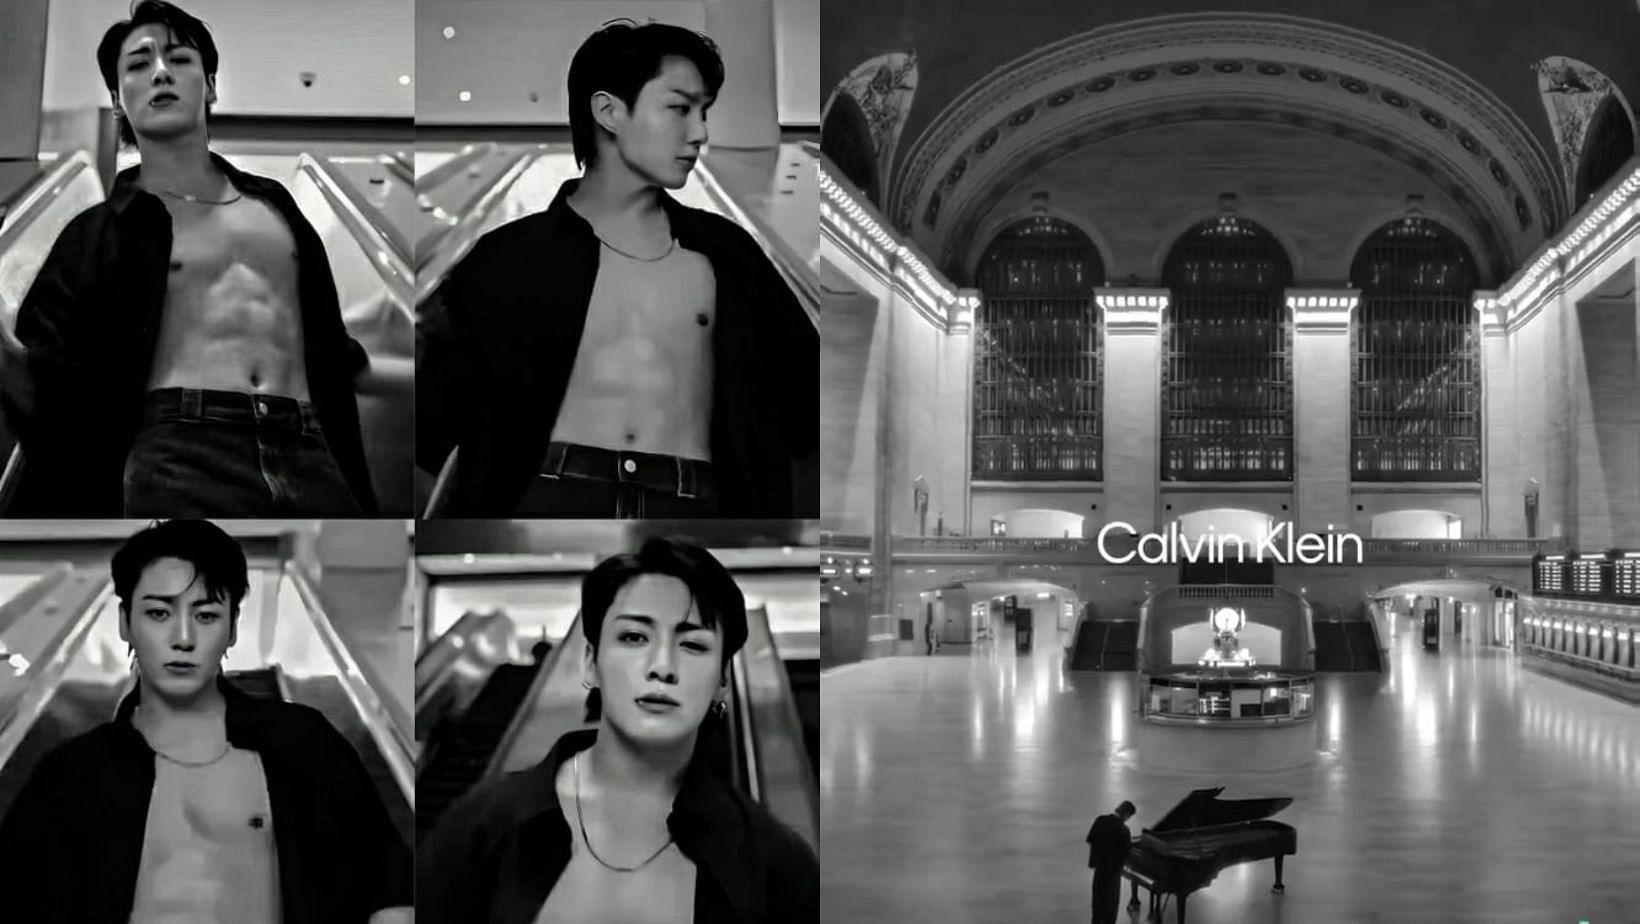 BTS Jungkook&rsquo;s scalding look in the newly released Calvin Klein campaign ad. (Images via X/@LiVi67661)